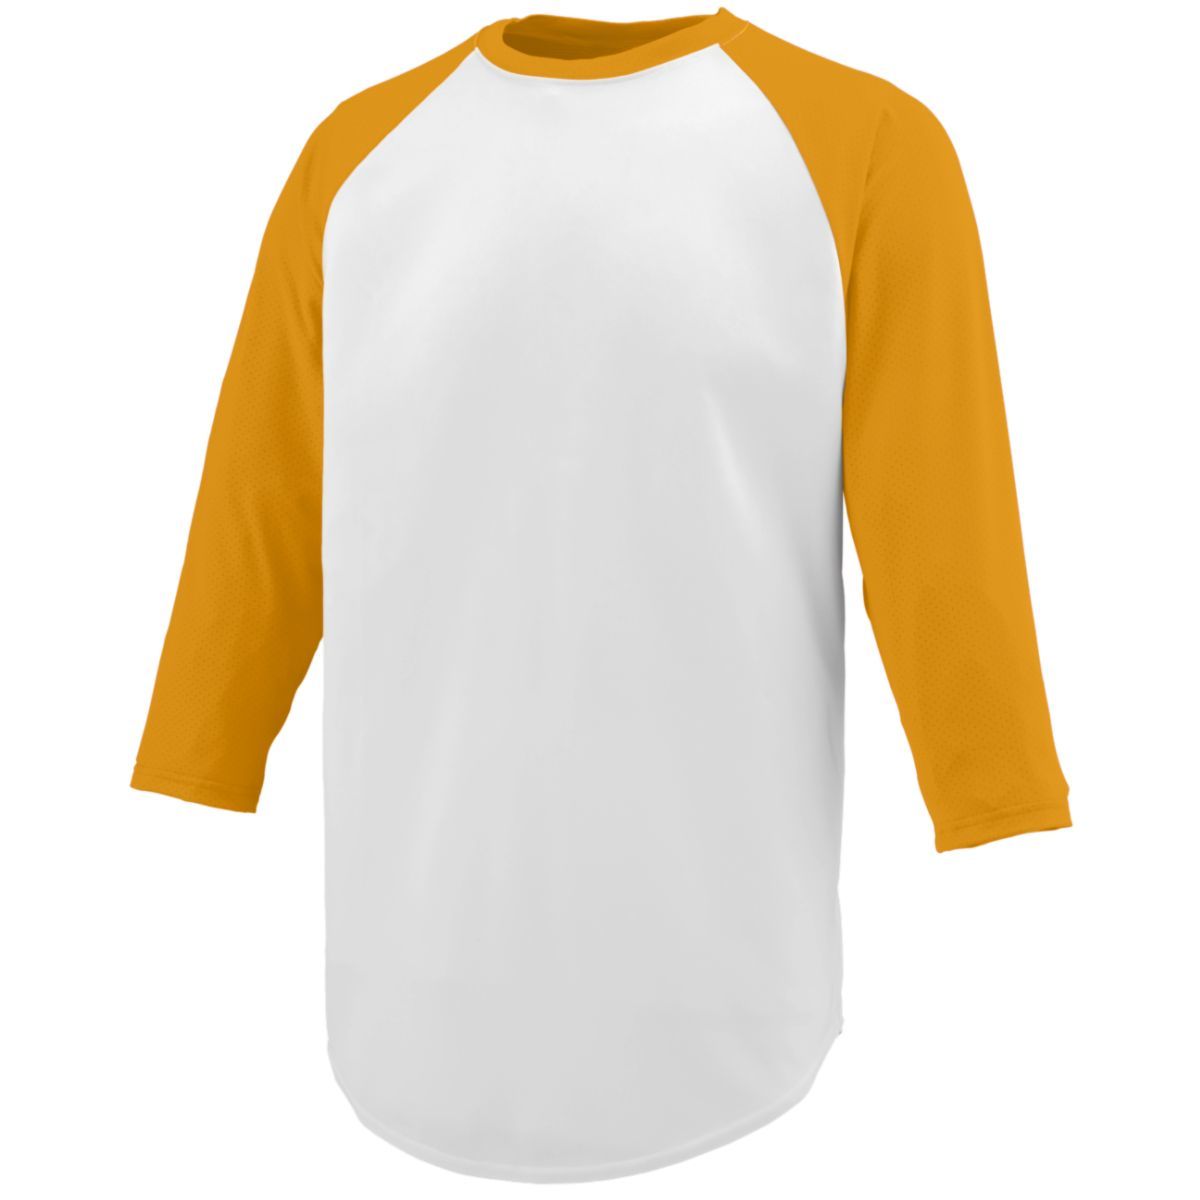 Augusta Sportswear Nova Jersey in White/Gold  -Part of the Adult, Adult-Jersey, Augusta-Products, Baseball, Shirts, All-Sports, All-Sports-1 product lines at KanaleyCreations.com